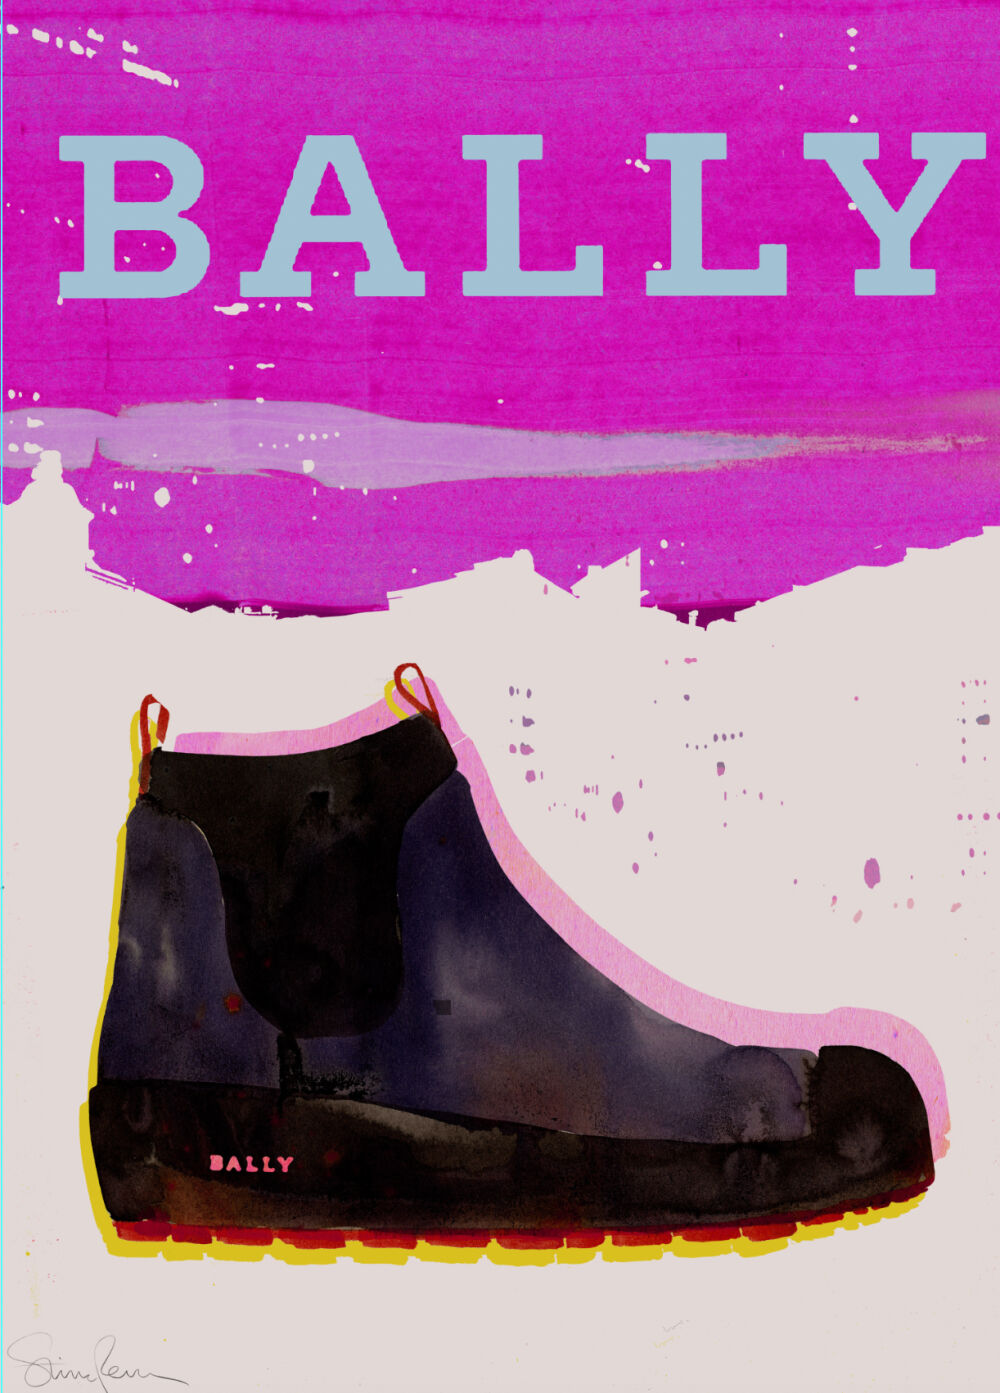 Illustrated global advertising campaign for the shoe brand Bally by Stina Persson